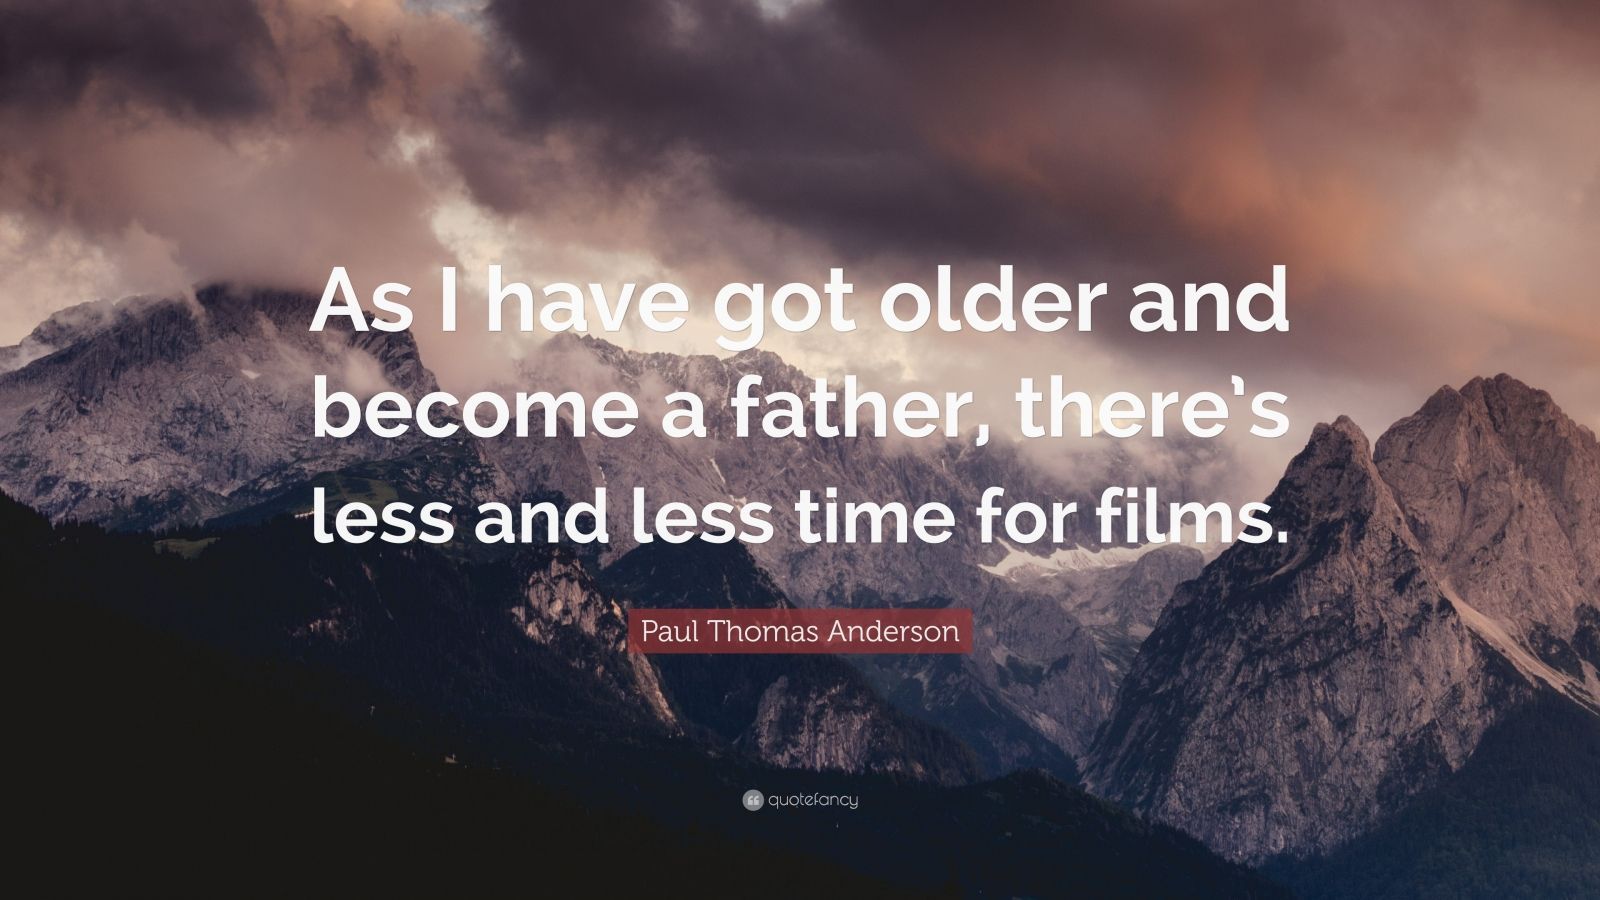 Paul Thomas Anderson Quote: “As I have got older and become a